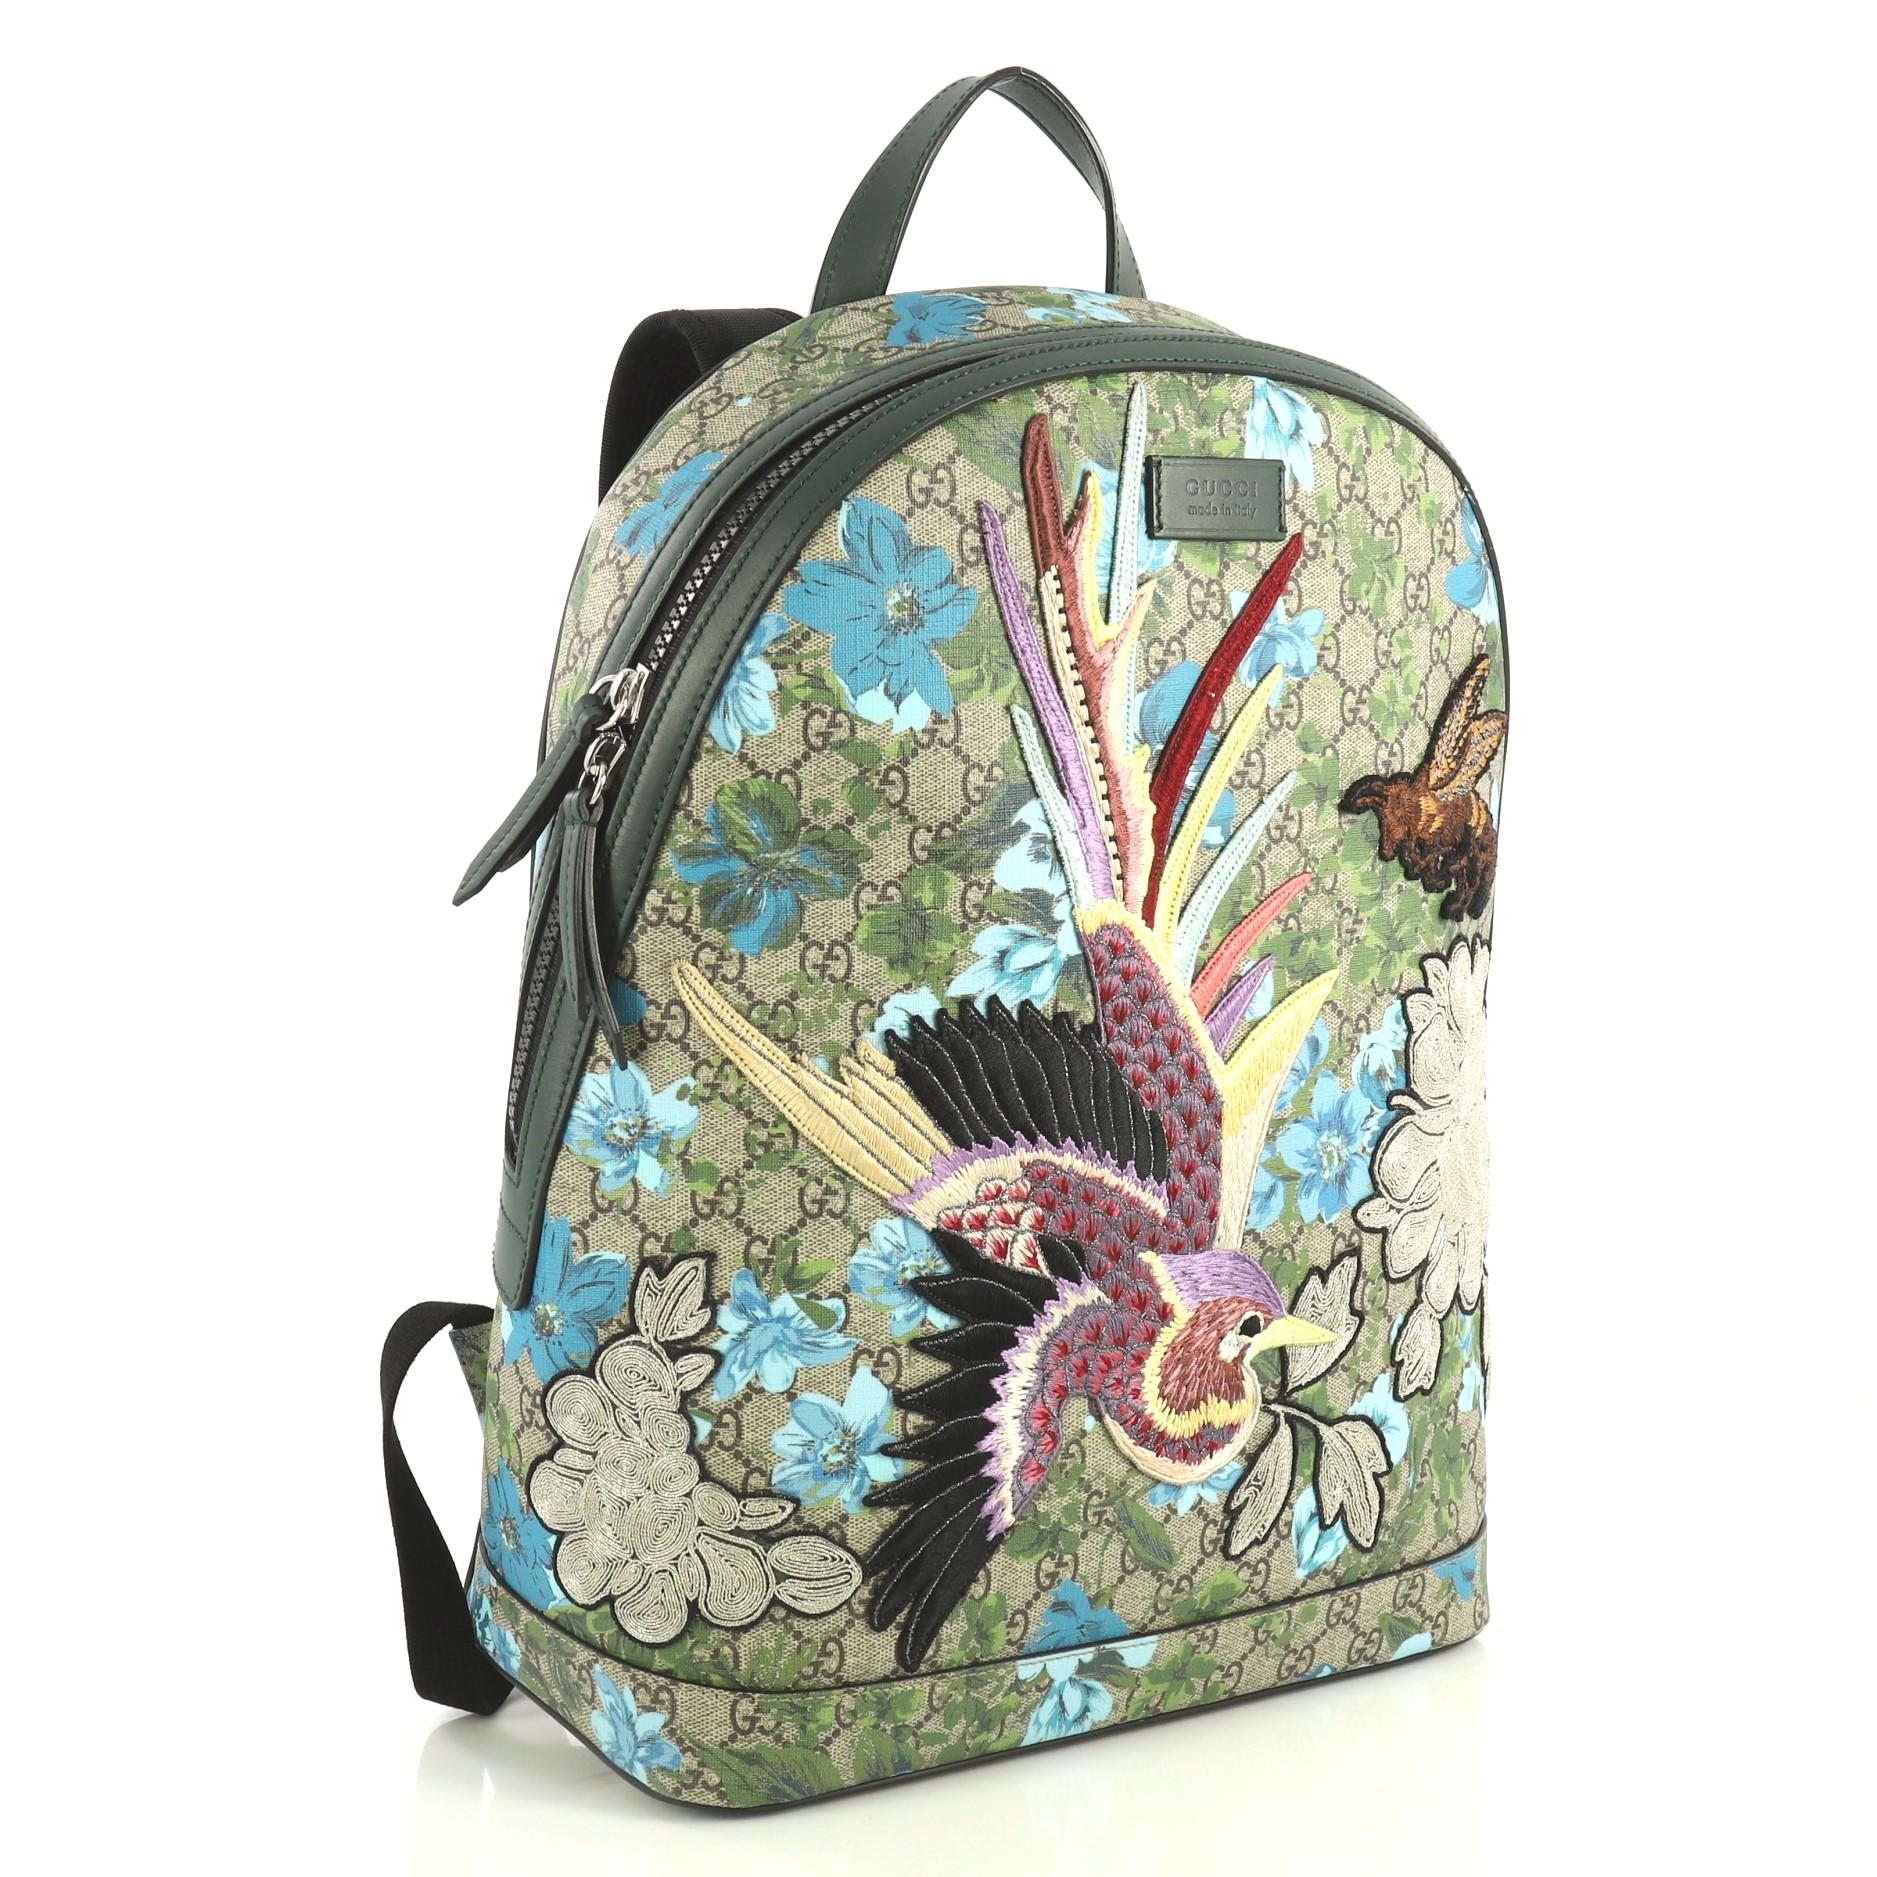 This Gucci Zip Backpack Blooms Print Embroidered GG Coated Canvas Medium, crafted from brown embroidered GG coated canvas, features adjustable shoulder straps, top handle, and silver-tone hardware. Its zip closure opens to a brown microfiber